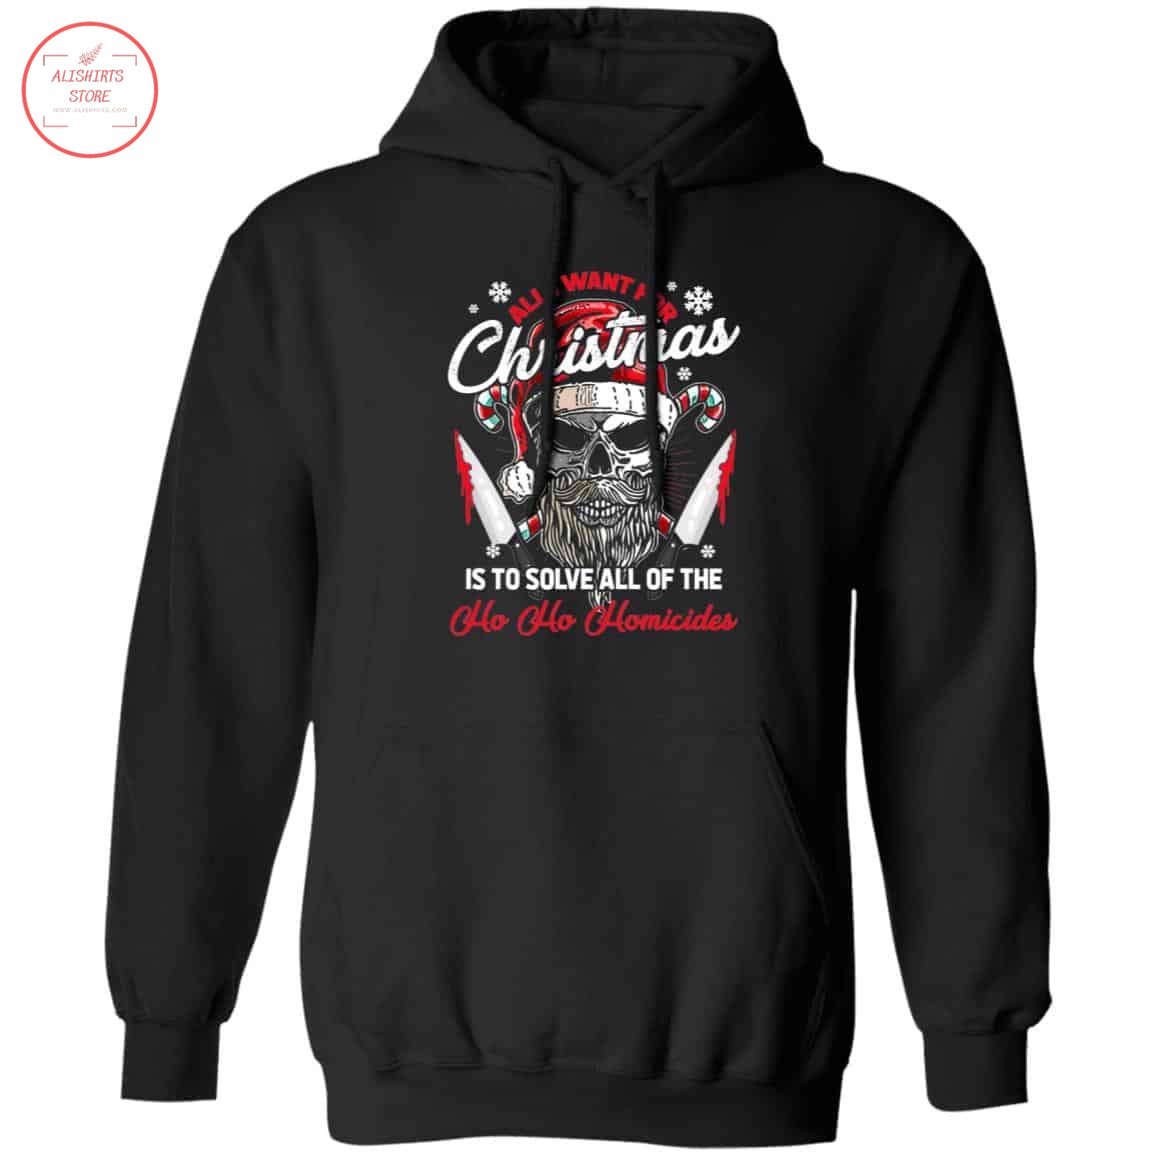 All I Want For Christmas Is To Solve All of The Ho Ho Homicides Shirt